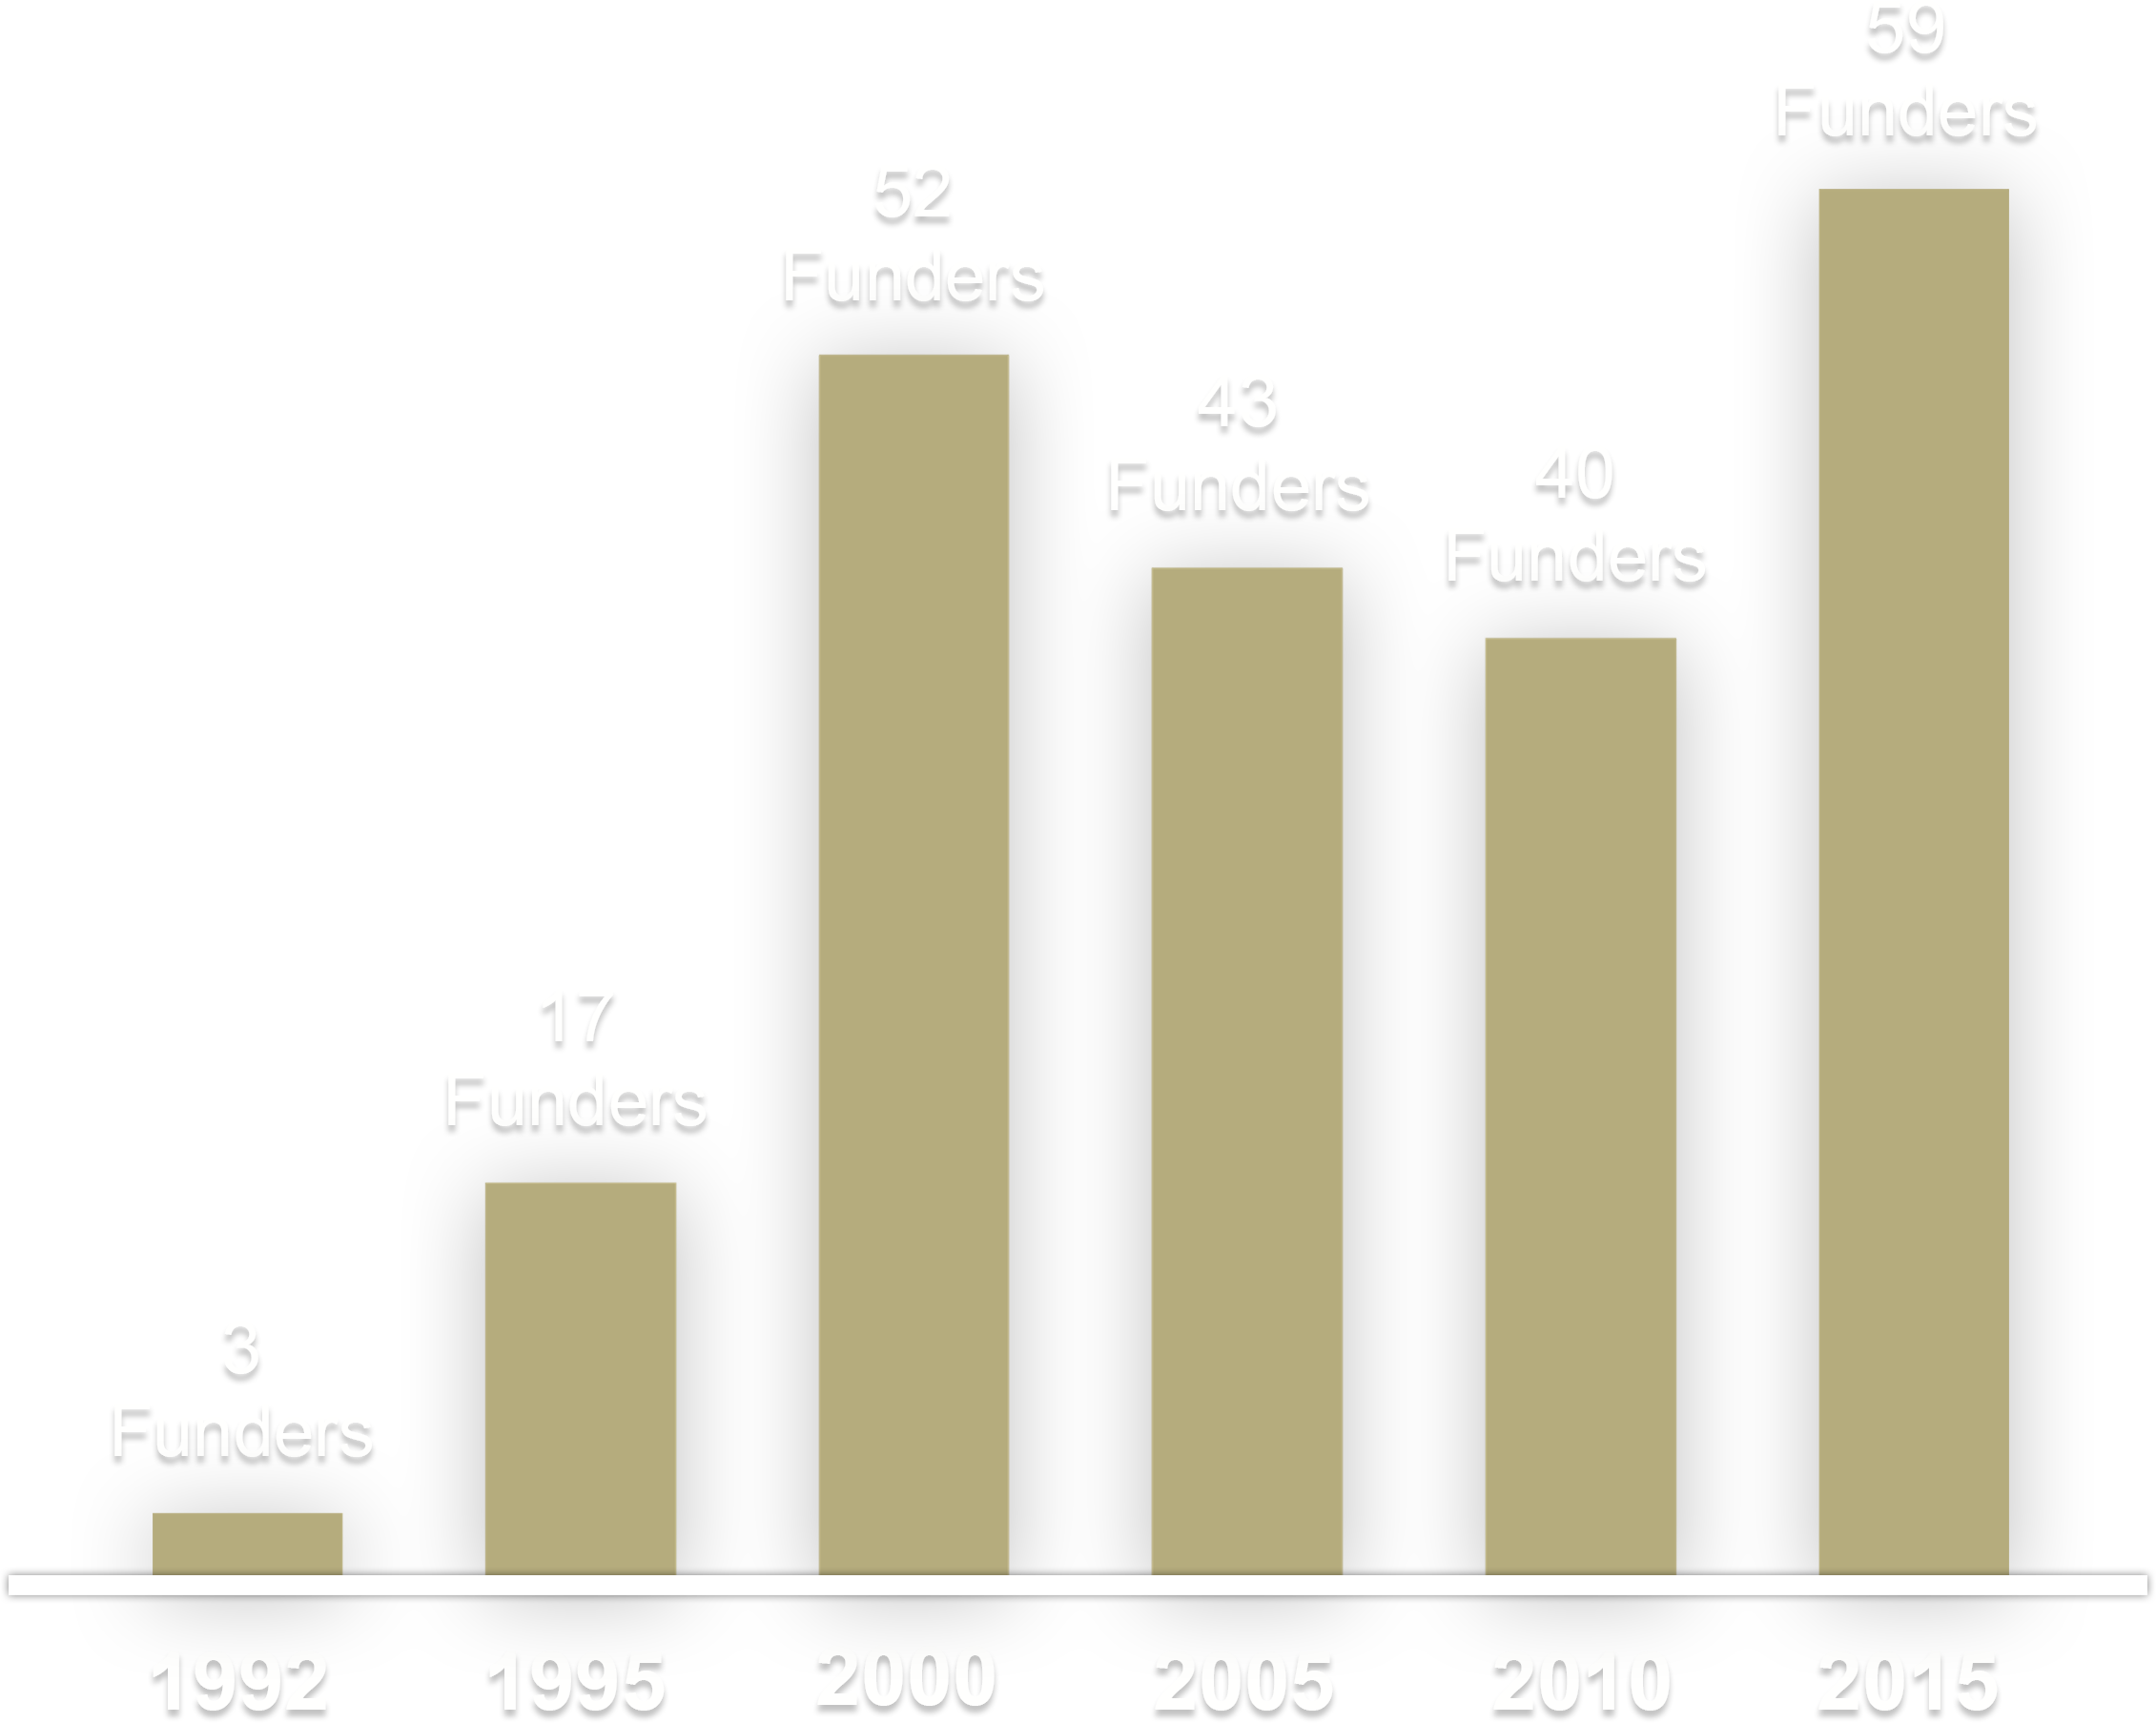 Chart showing average total funders for a given year in a 25 year range (1992-2015)